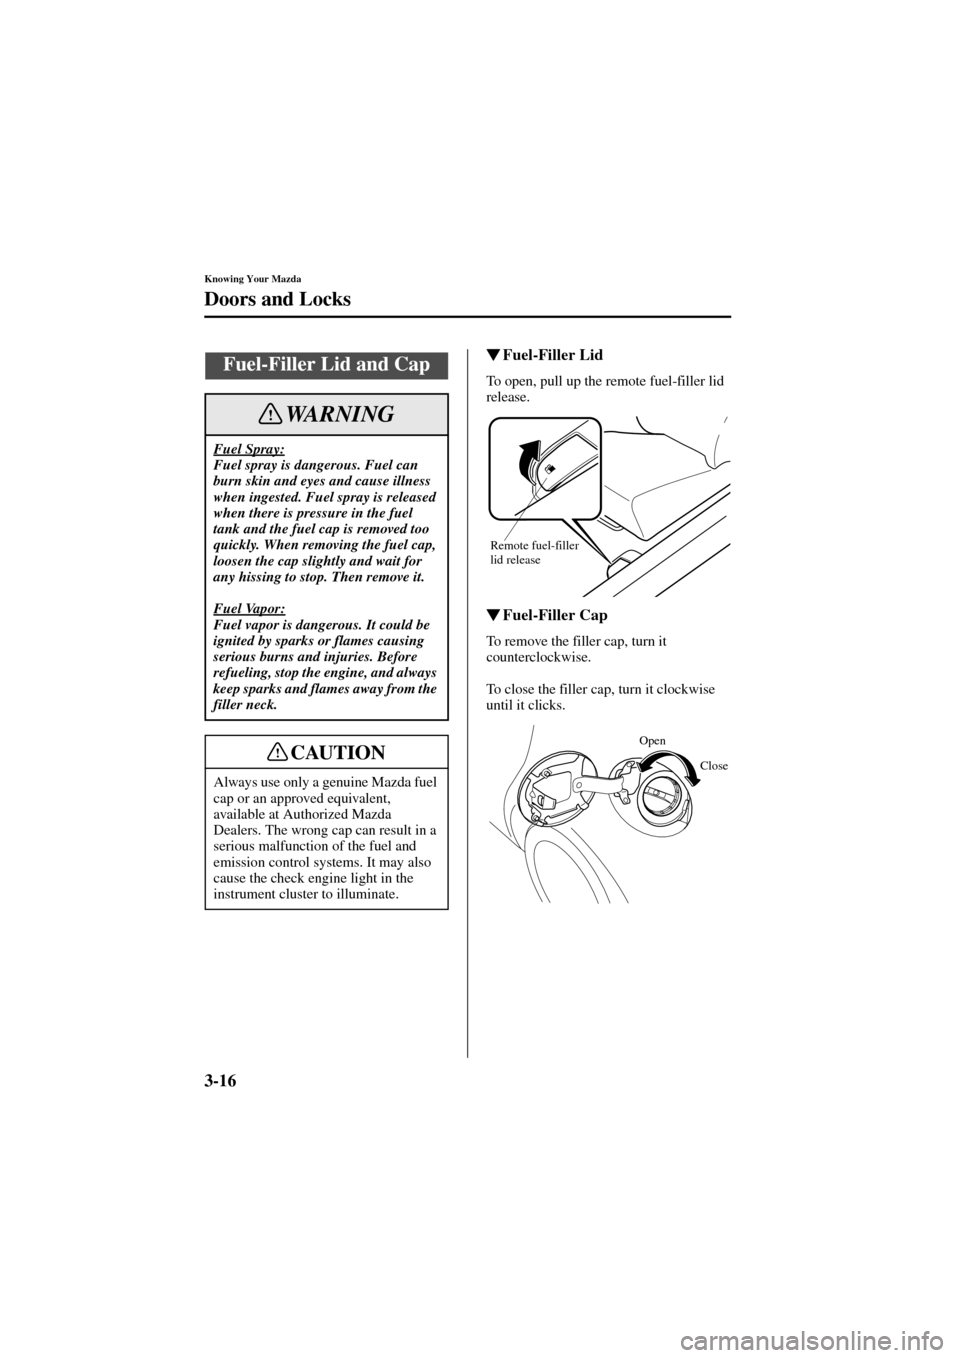 MAZDA MODEL 6 2004  Owners Manual (in English) 3-16
Knowing Your Mazda
Doors and Locks
Form No. 8R29-EA-02I
Fuel-Filler Lid
To open, pull up the remote fuel-filler lid 
release.
Fuel-Filler Cap
To remove the filler cap, turn it 
counterclockwise